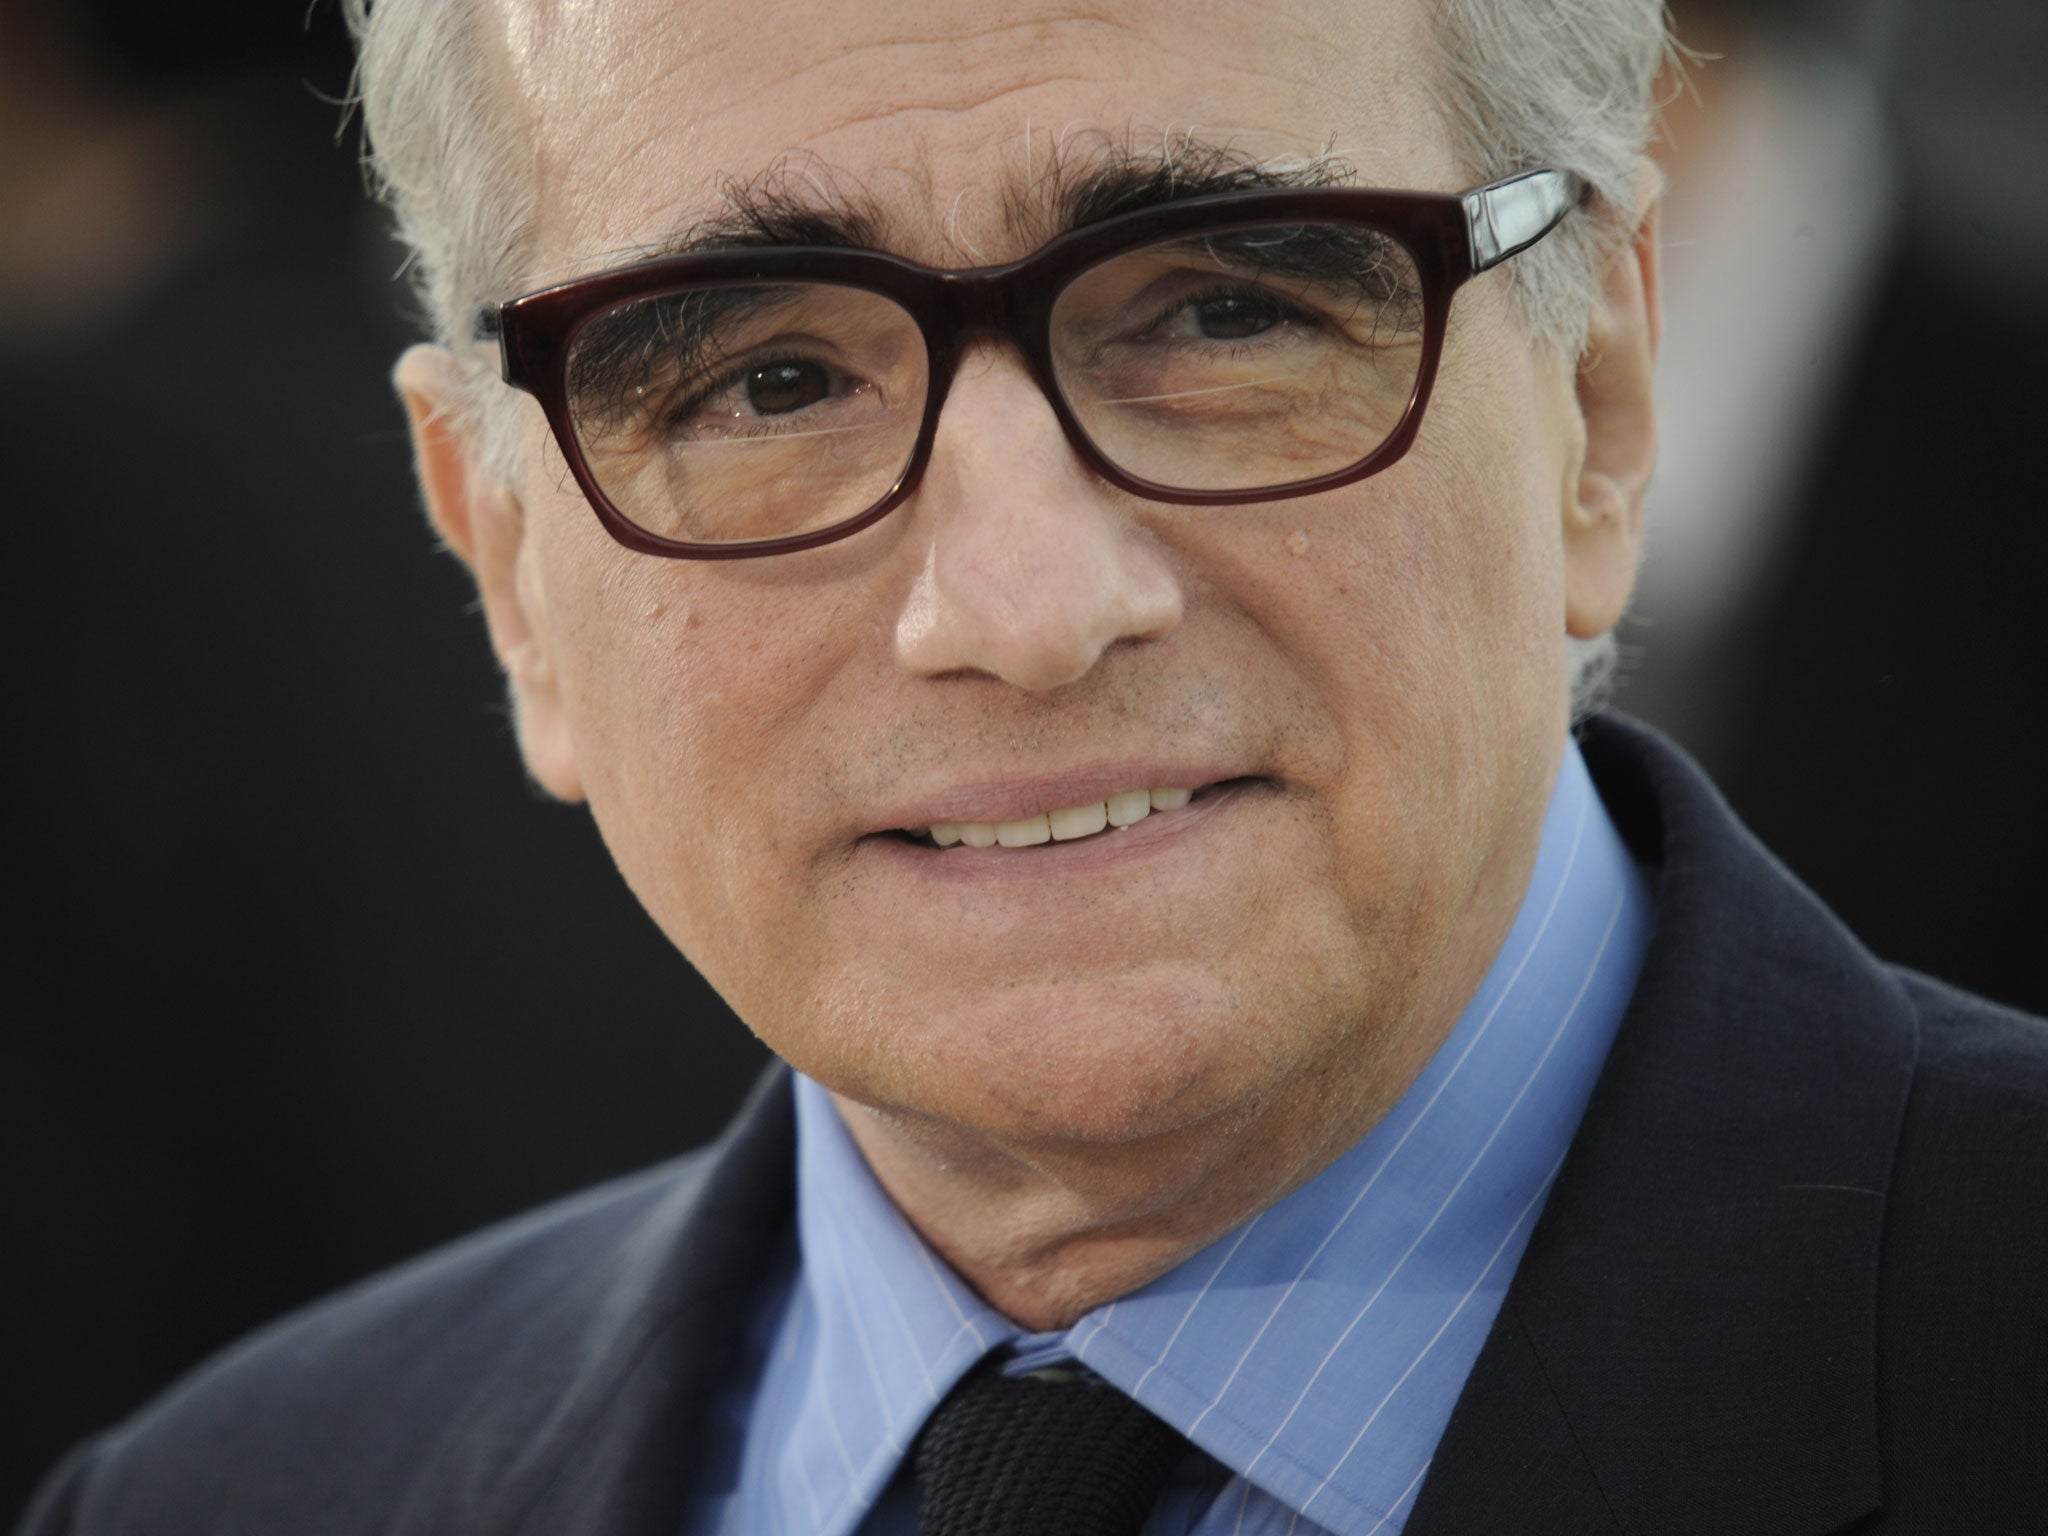 Martin Scorsese is on board to direct Shutter Island prequel Ashecliffe for HBO and Paramount